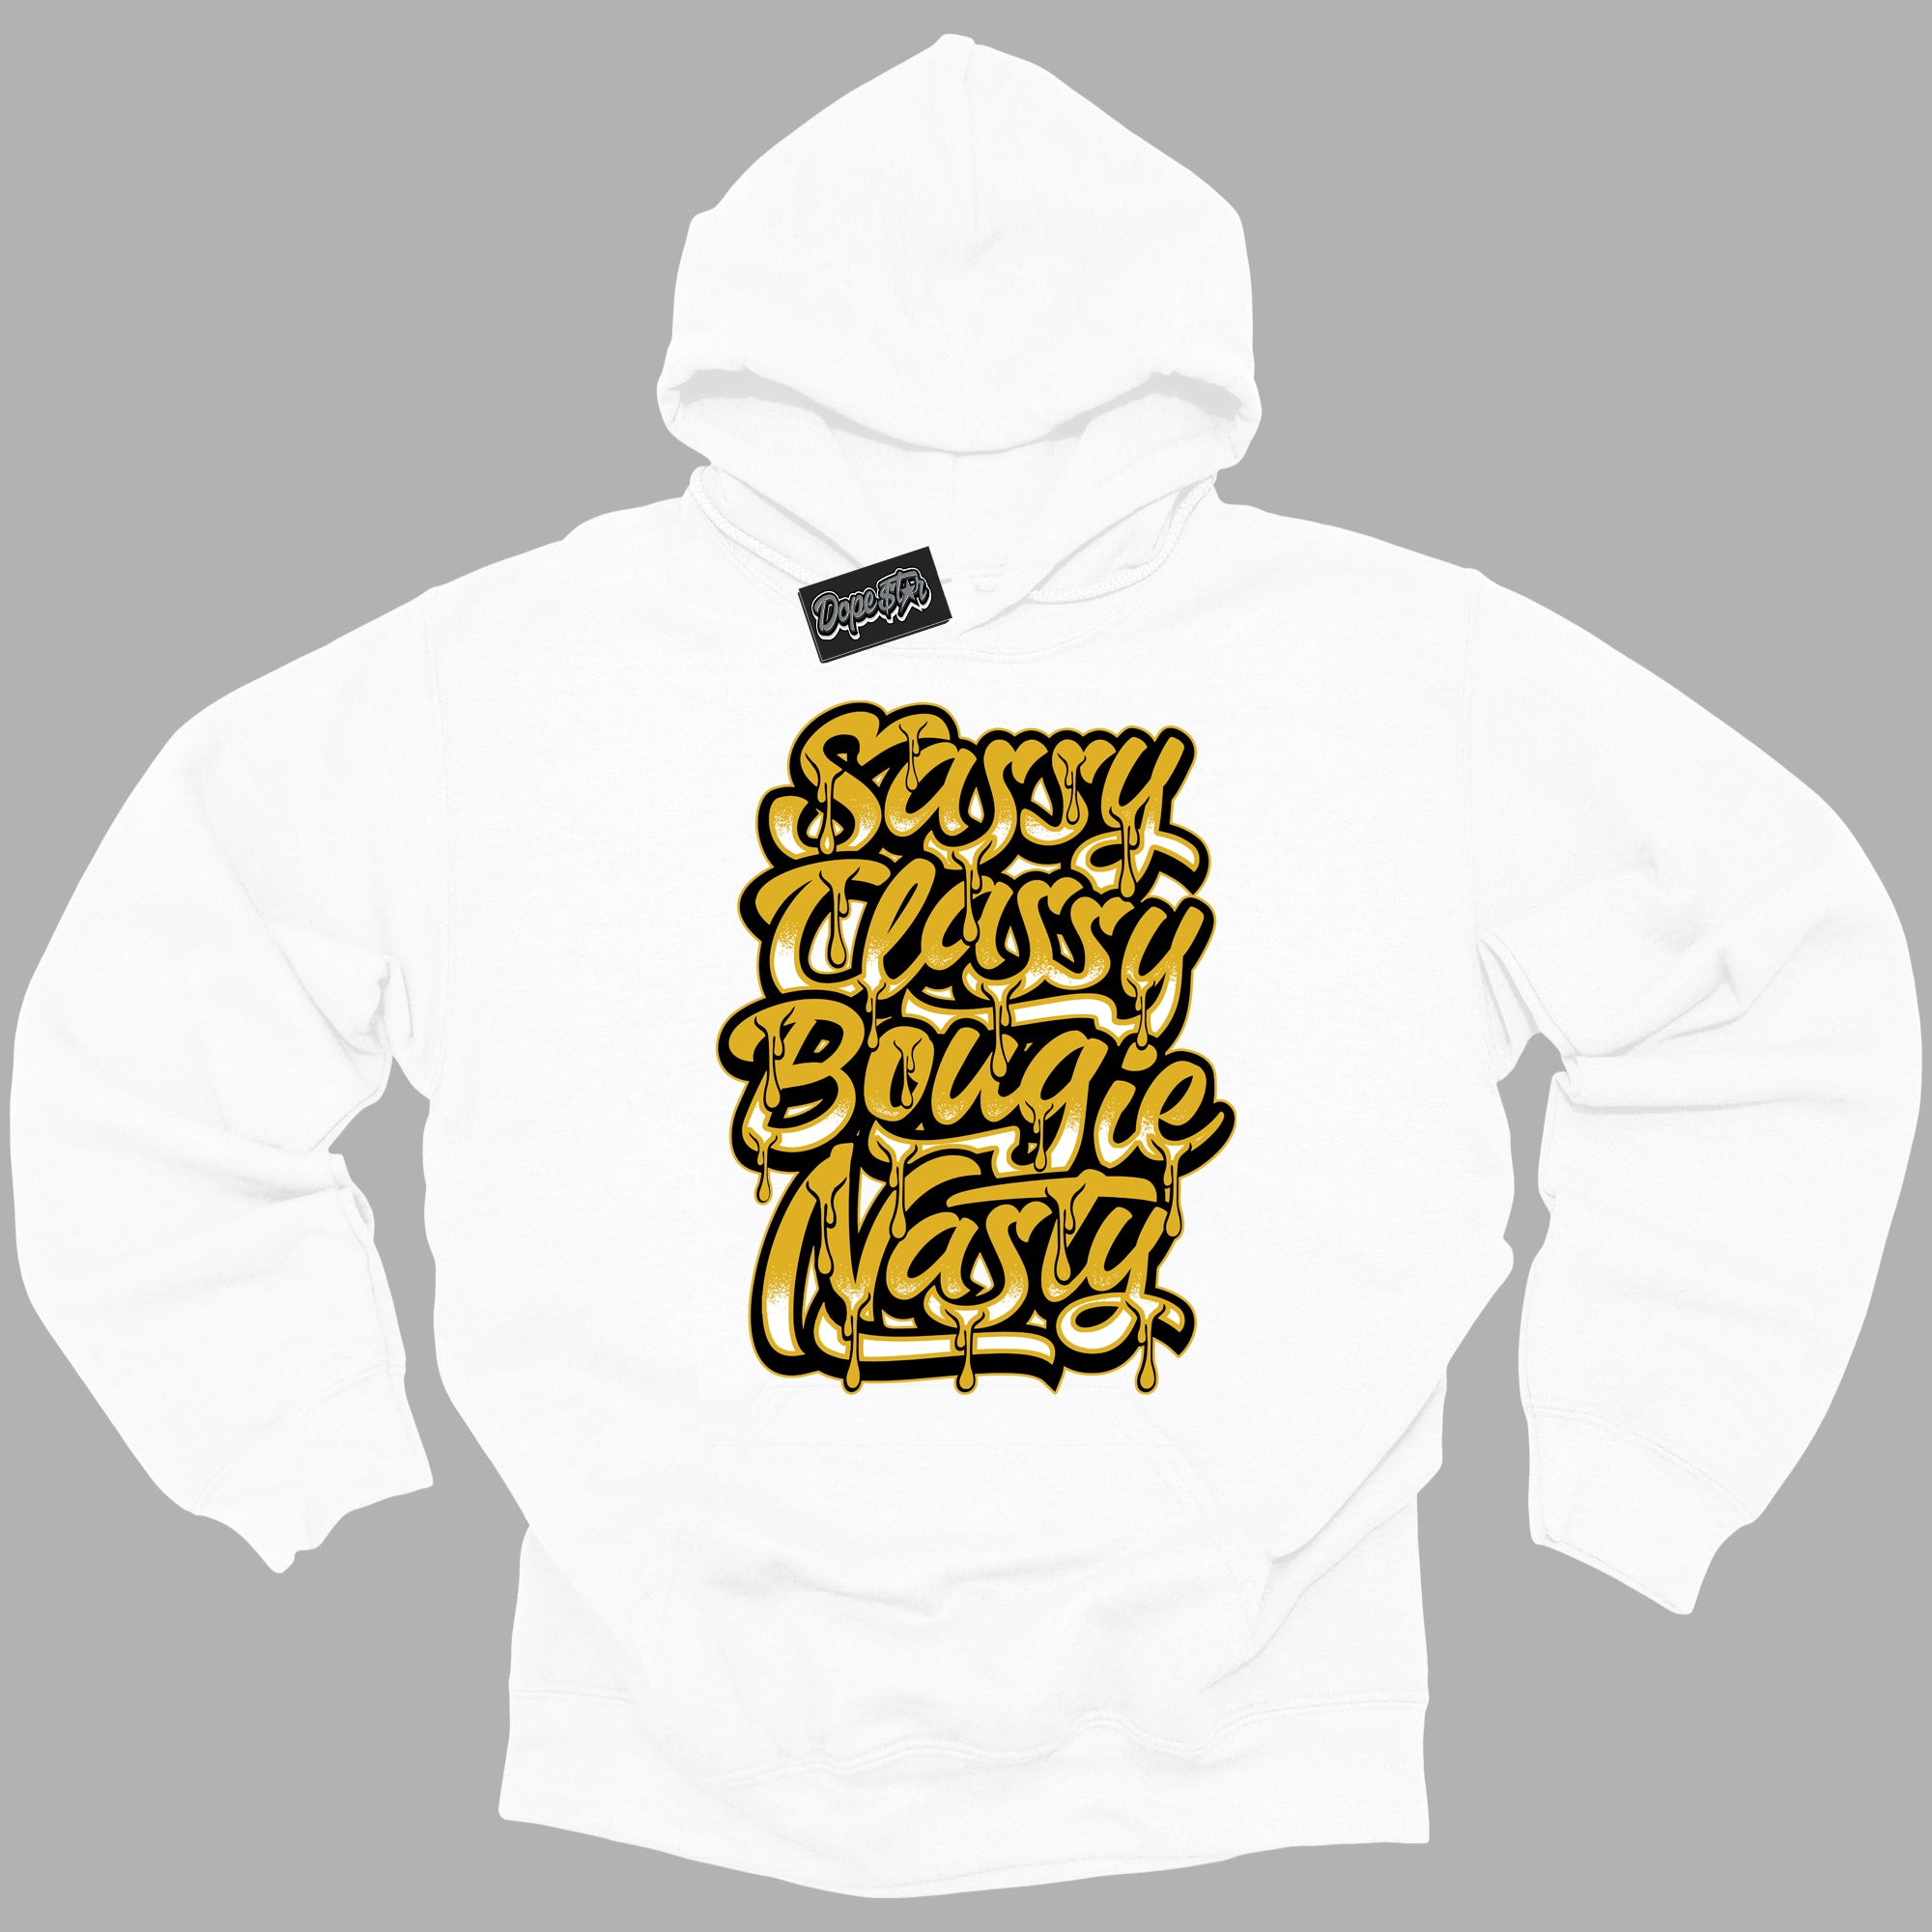 Cool White Hoodie with “ Sassy Classy ”  design that Perfectly Matches Yellow Ochre 6s Sneakers.